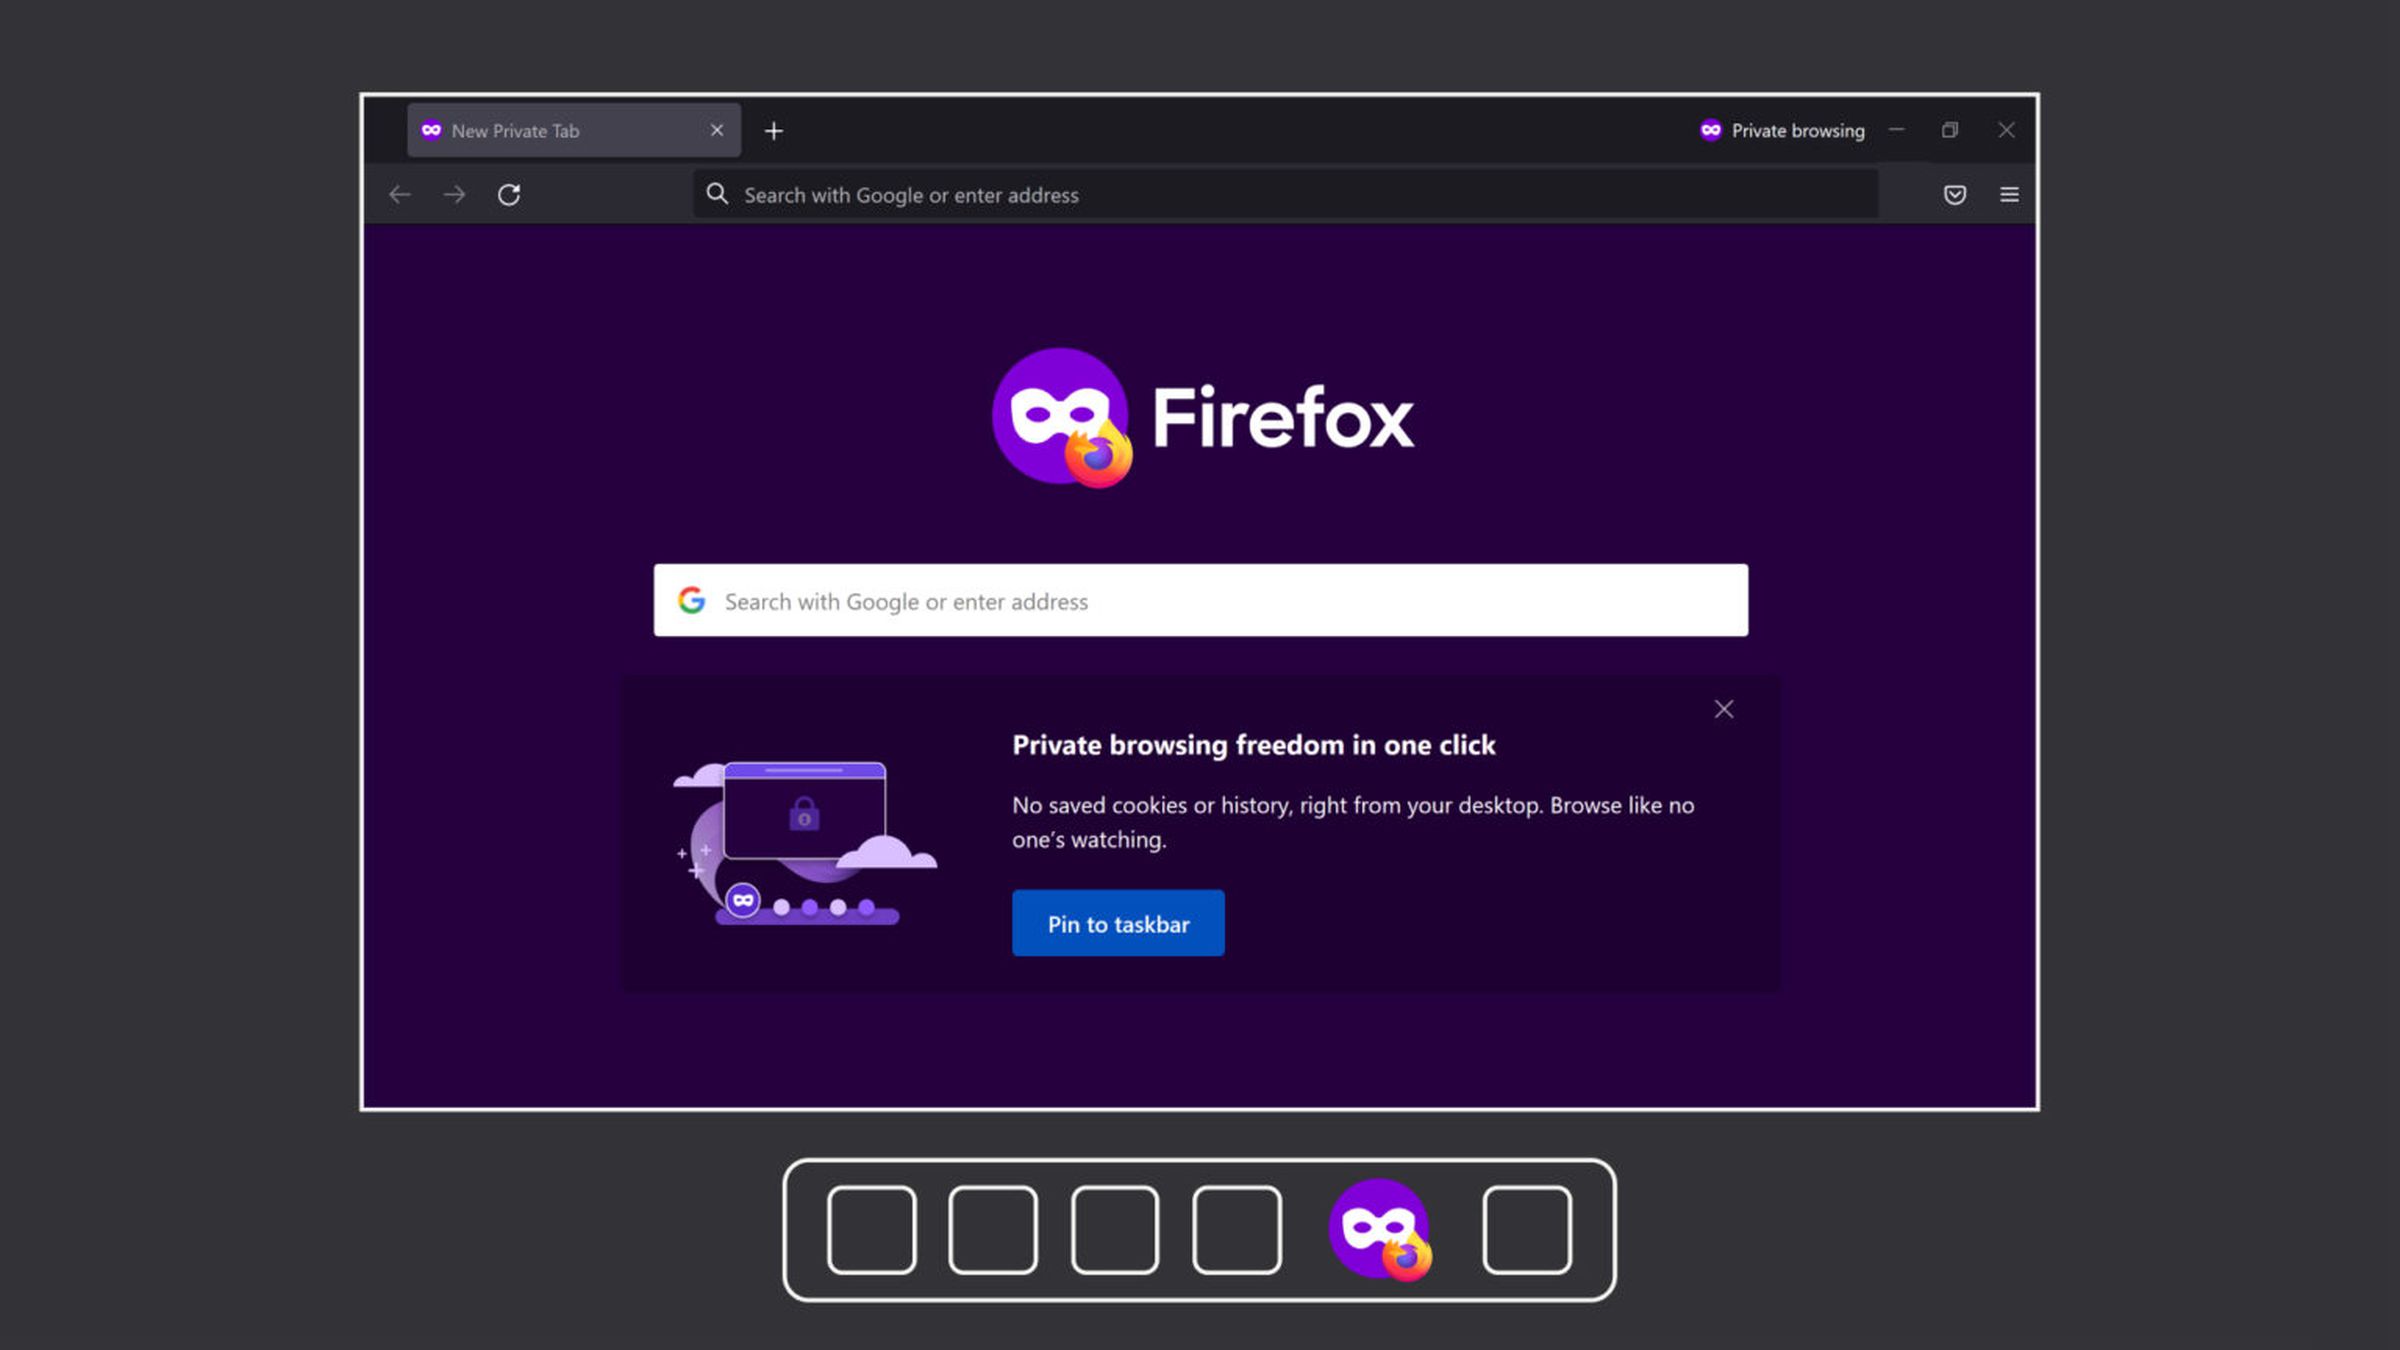 An image showing the Firefox browser in private browsing mode